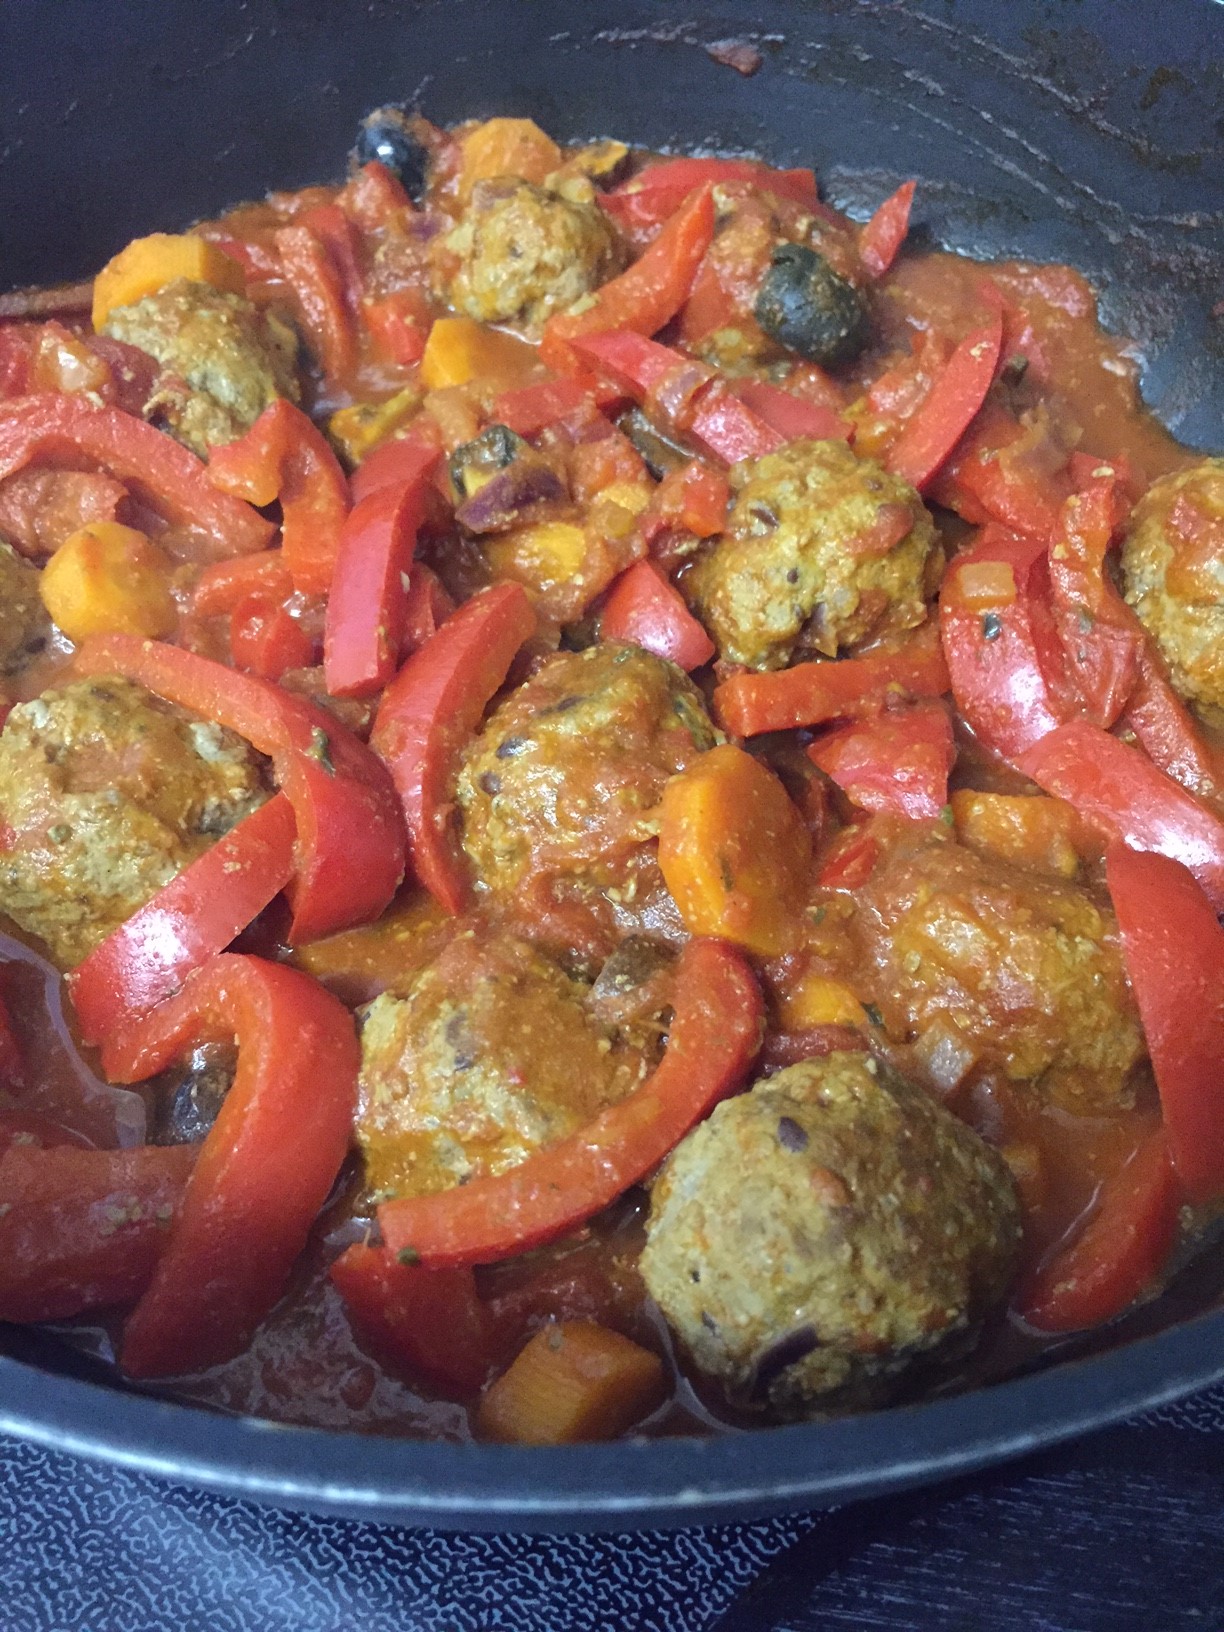 Spicy Meatballs with peppers